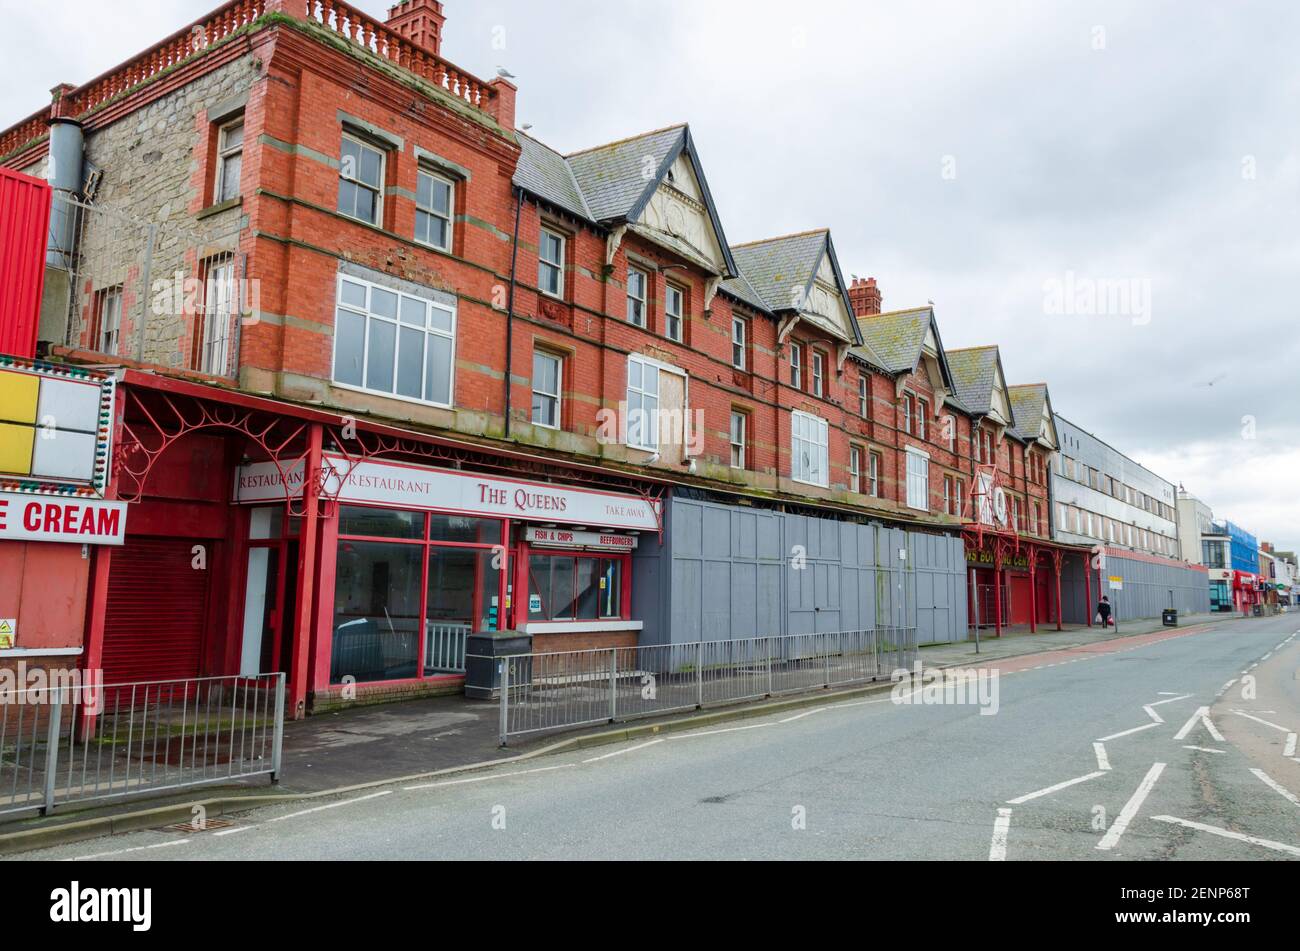 Rhyl, Denbighshire; UK: Feb 21, 2021: A general street scene showing the soon to be demolished and redeveloped Queens Buildings. Stock Photo